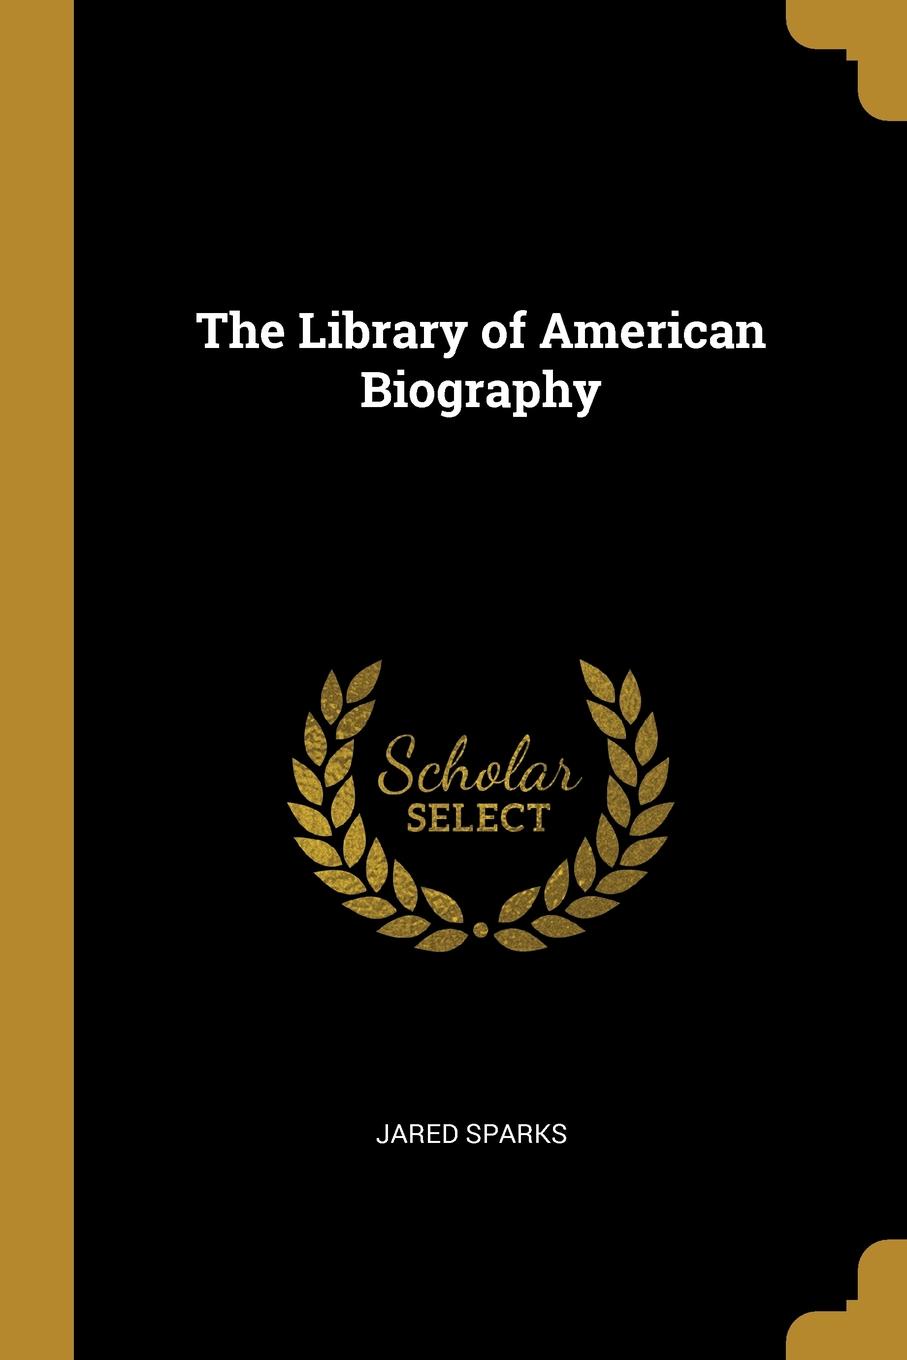 The Library of American Biography